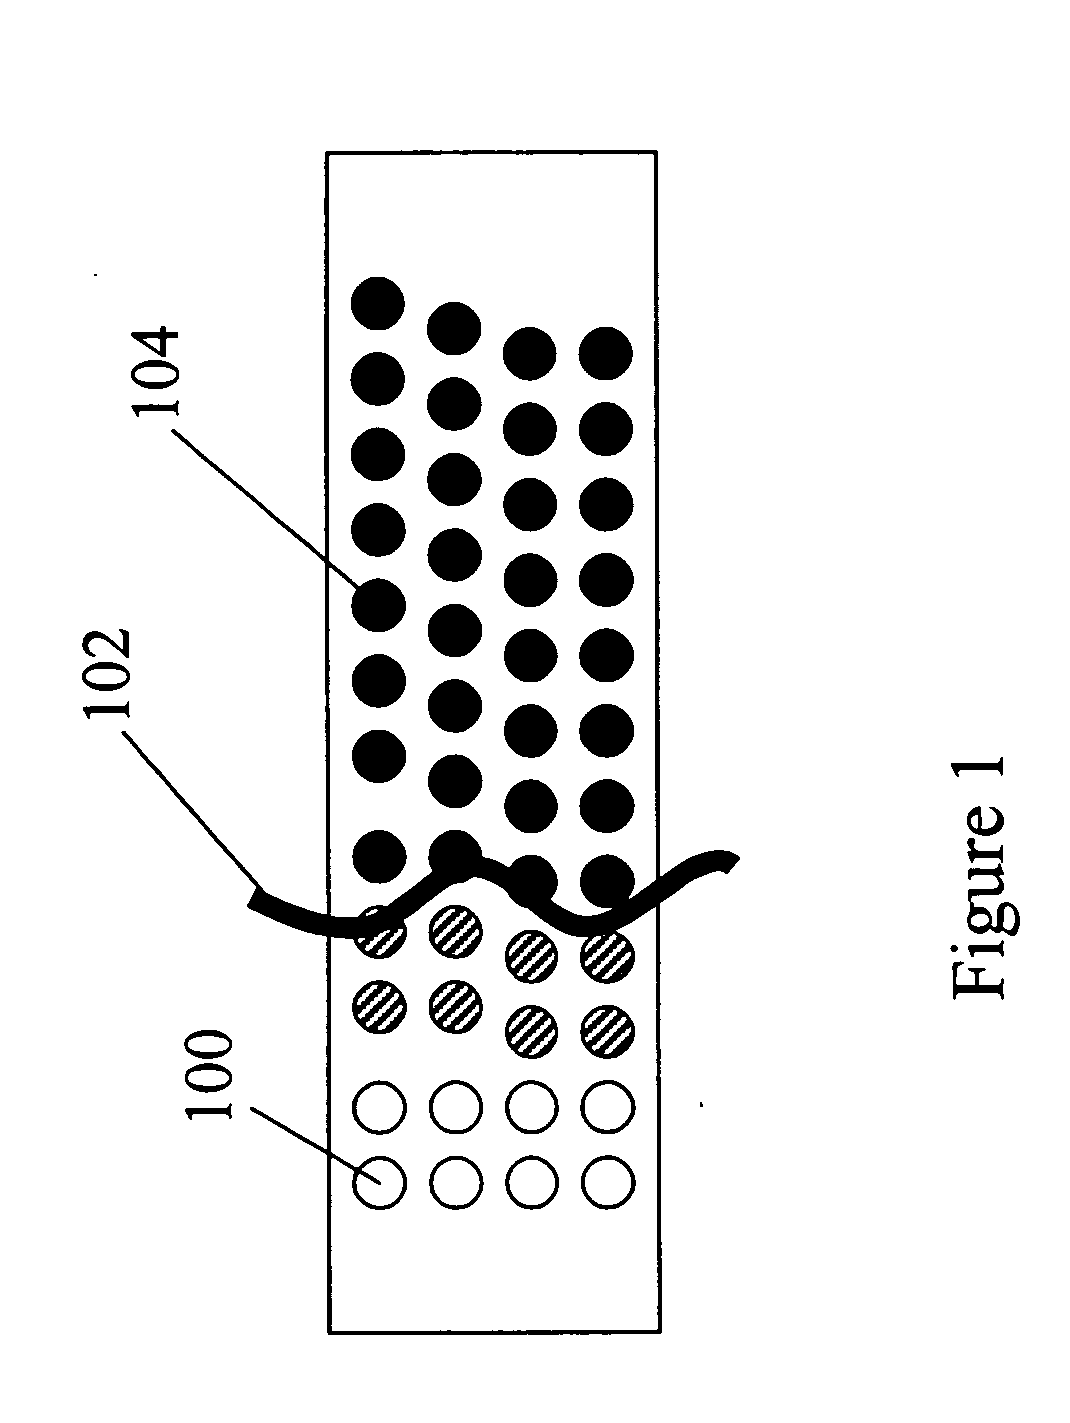 Methods and materials for the reduction and control of moisture and oxygen in OLED devices